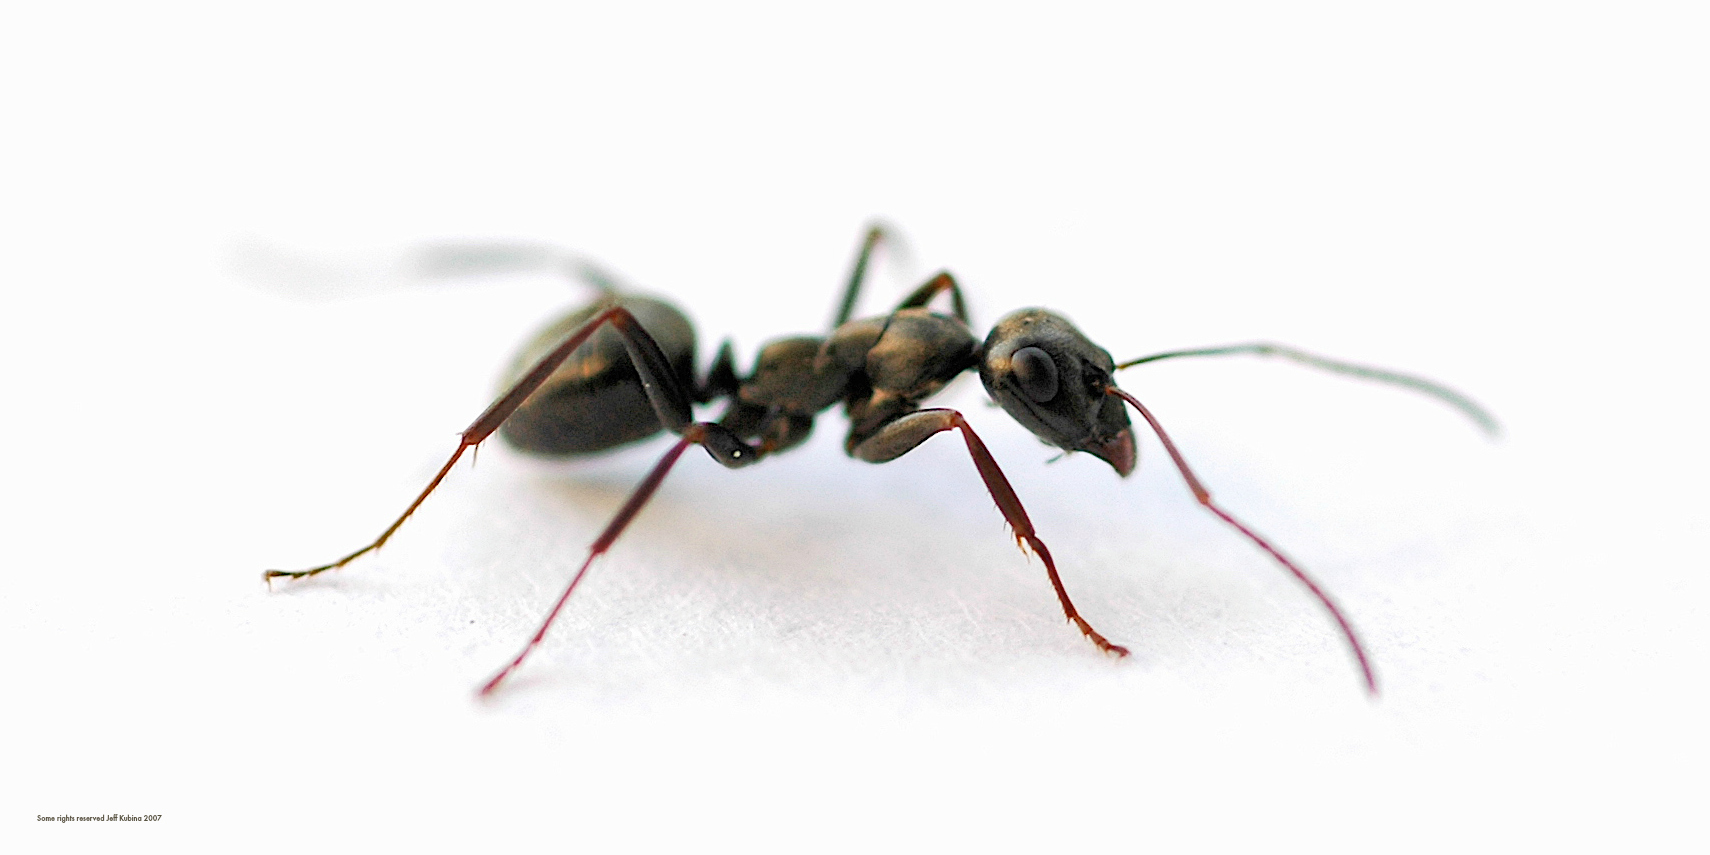 How to get rid of ants naturally without using toxic poisons